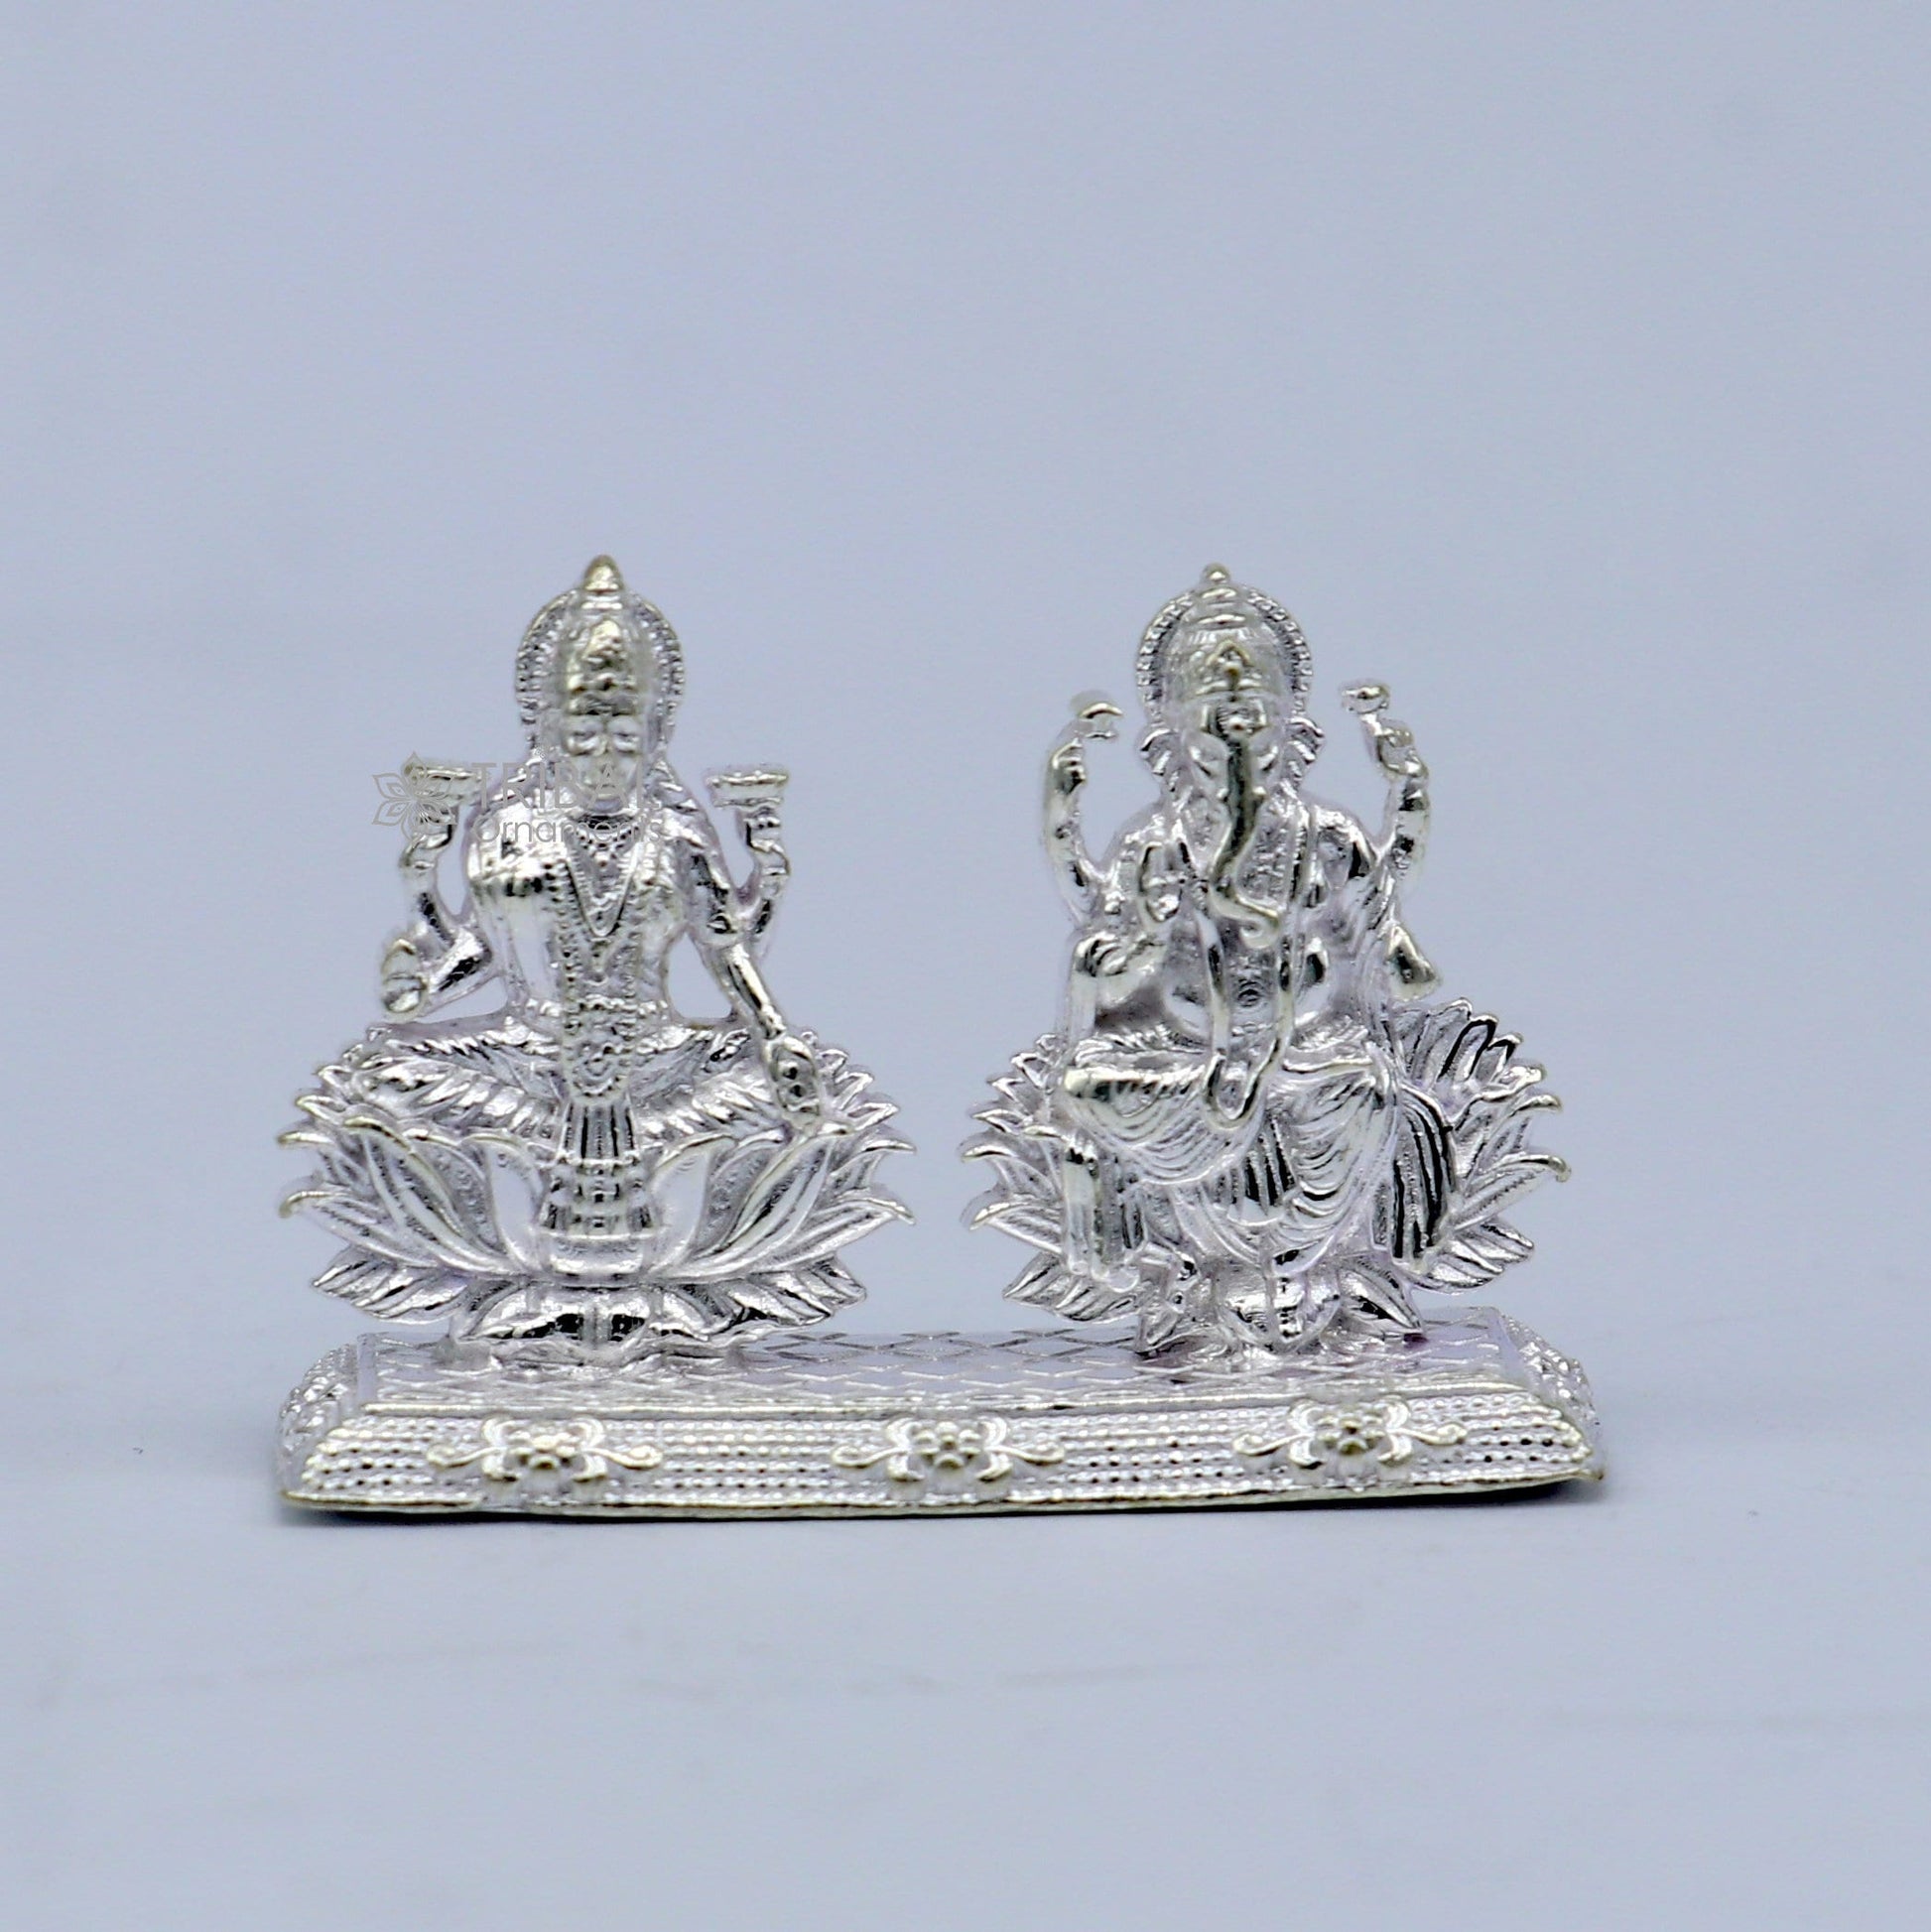 925 Sterling silver Lakshmi and Ganesha statue, puja article figurine, Diwali puja brings joy, hope, and wealth to the owners art748 - TRIBAL ORNAMENTS